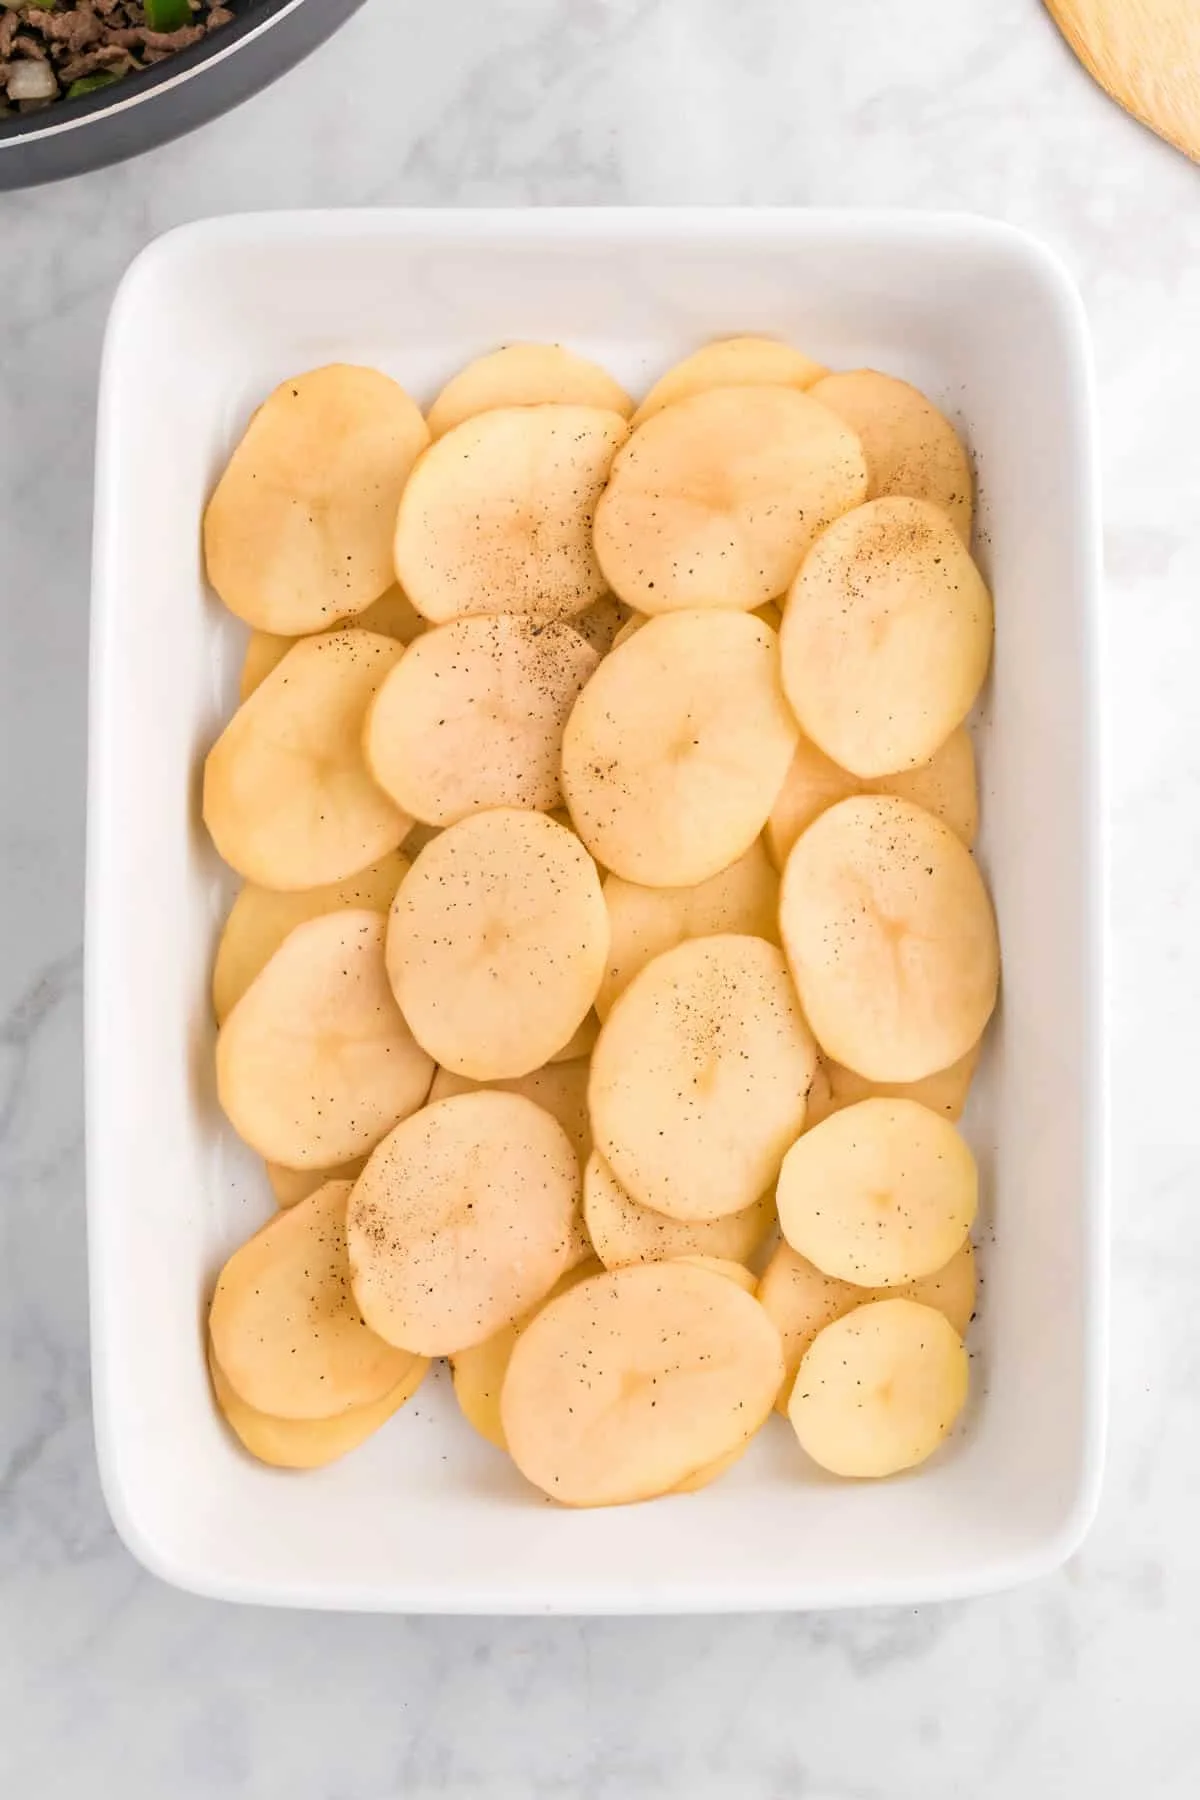 layers of sliced potatoes in a baking dish